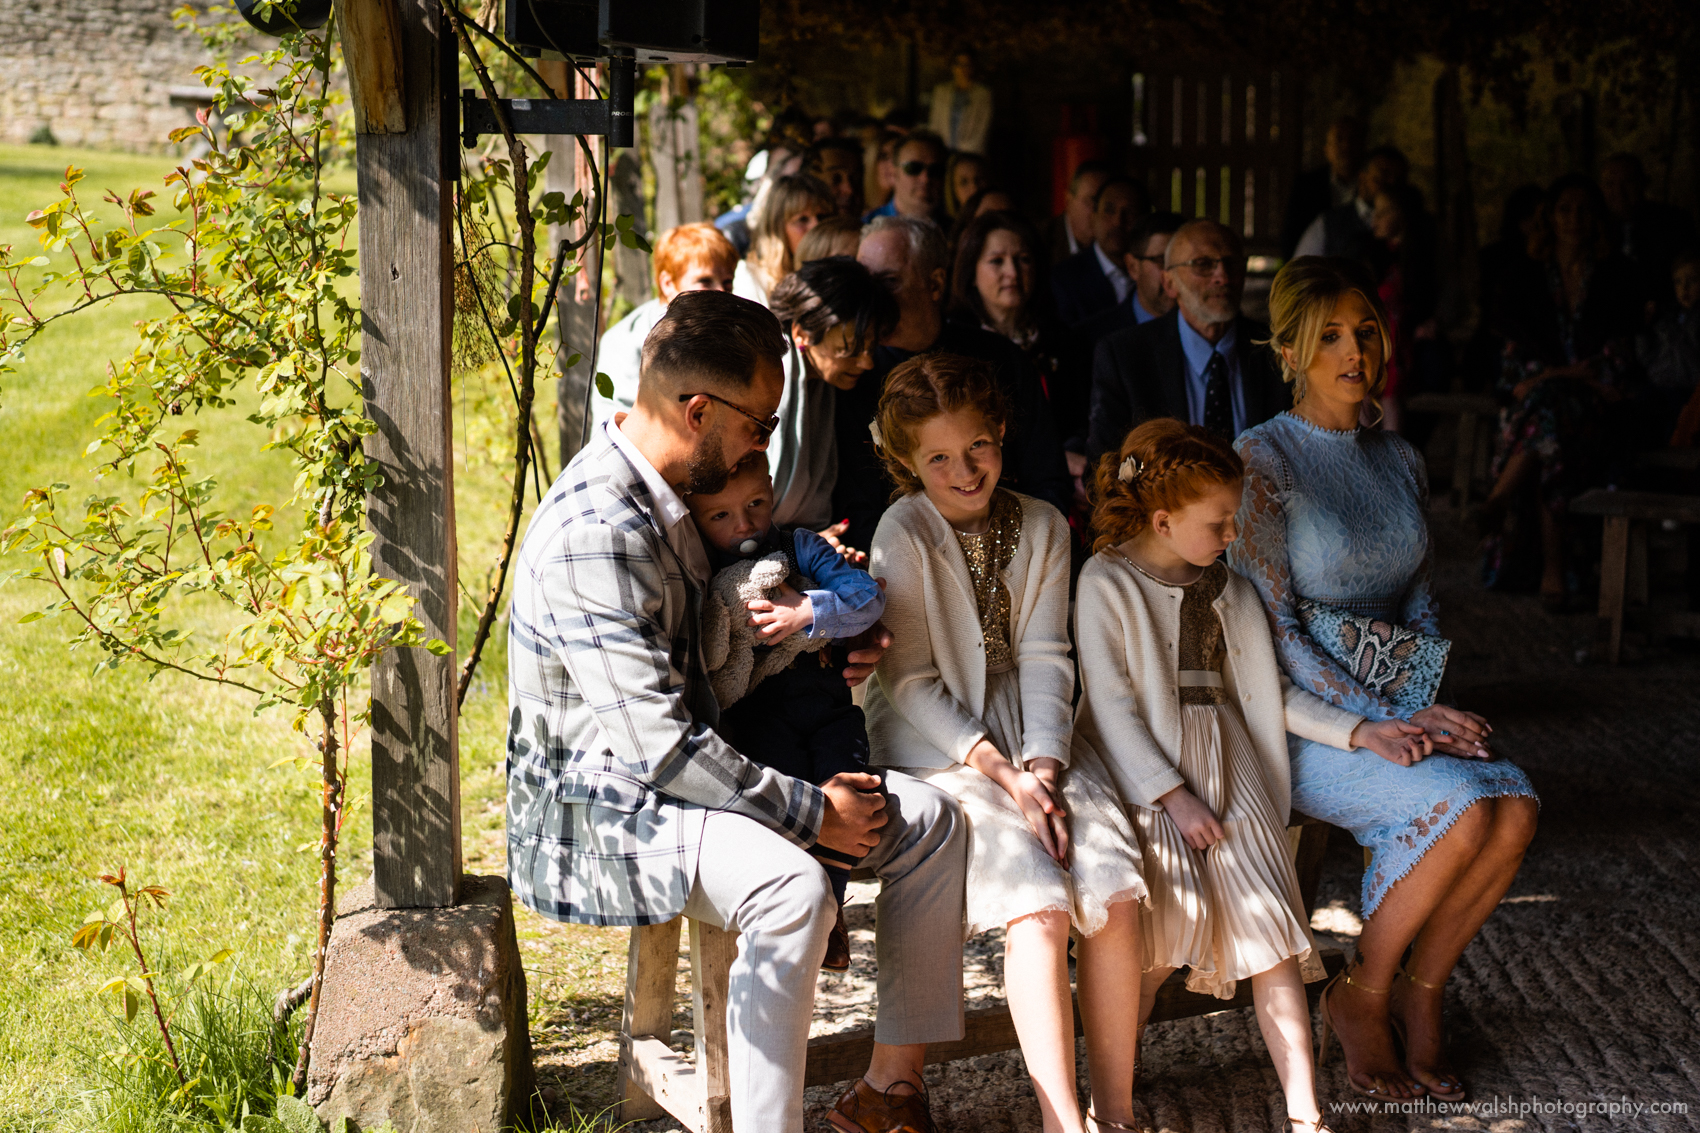 Family friends and natural light under the ceremony canopy